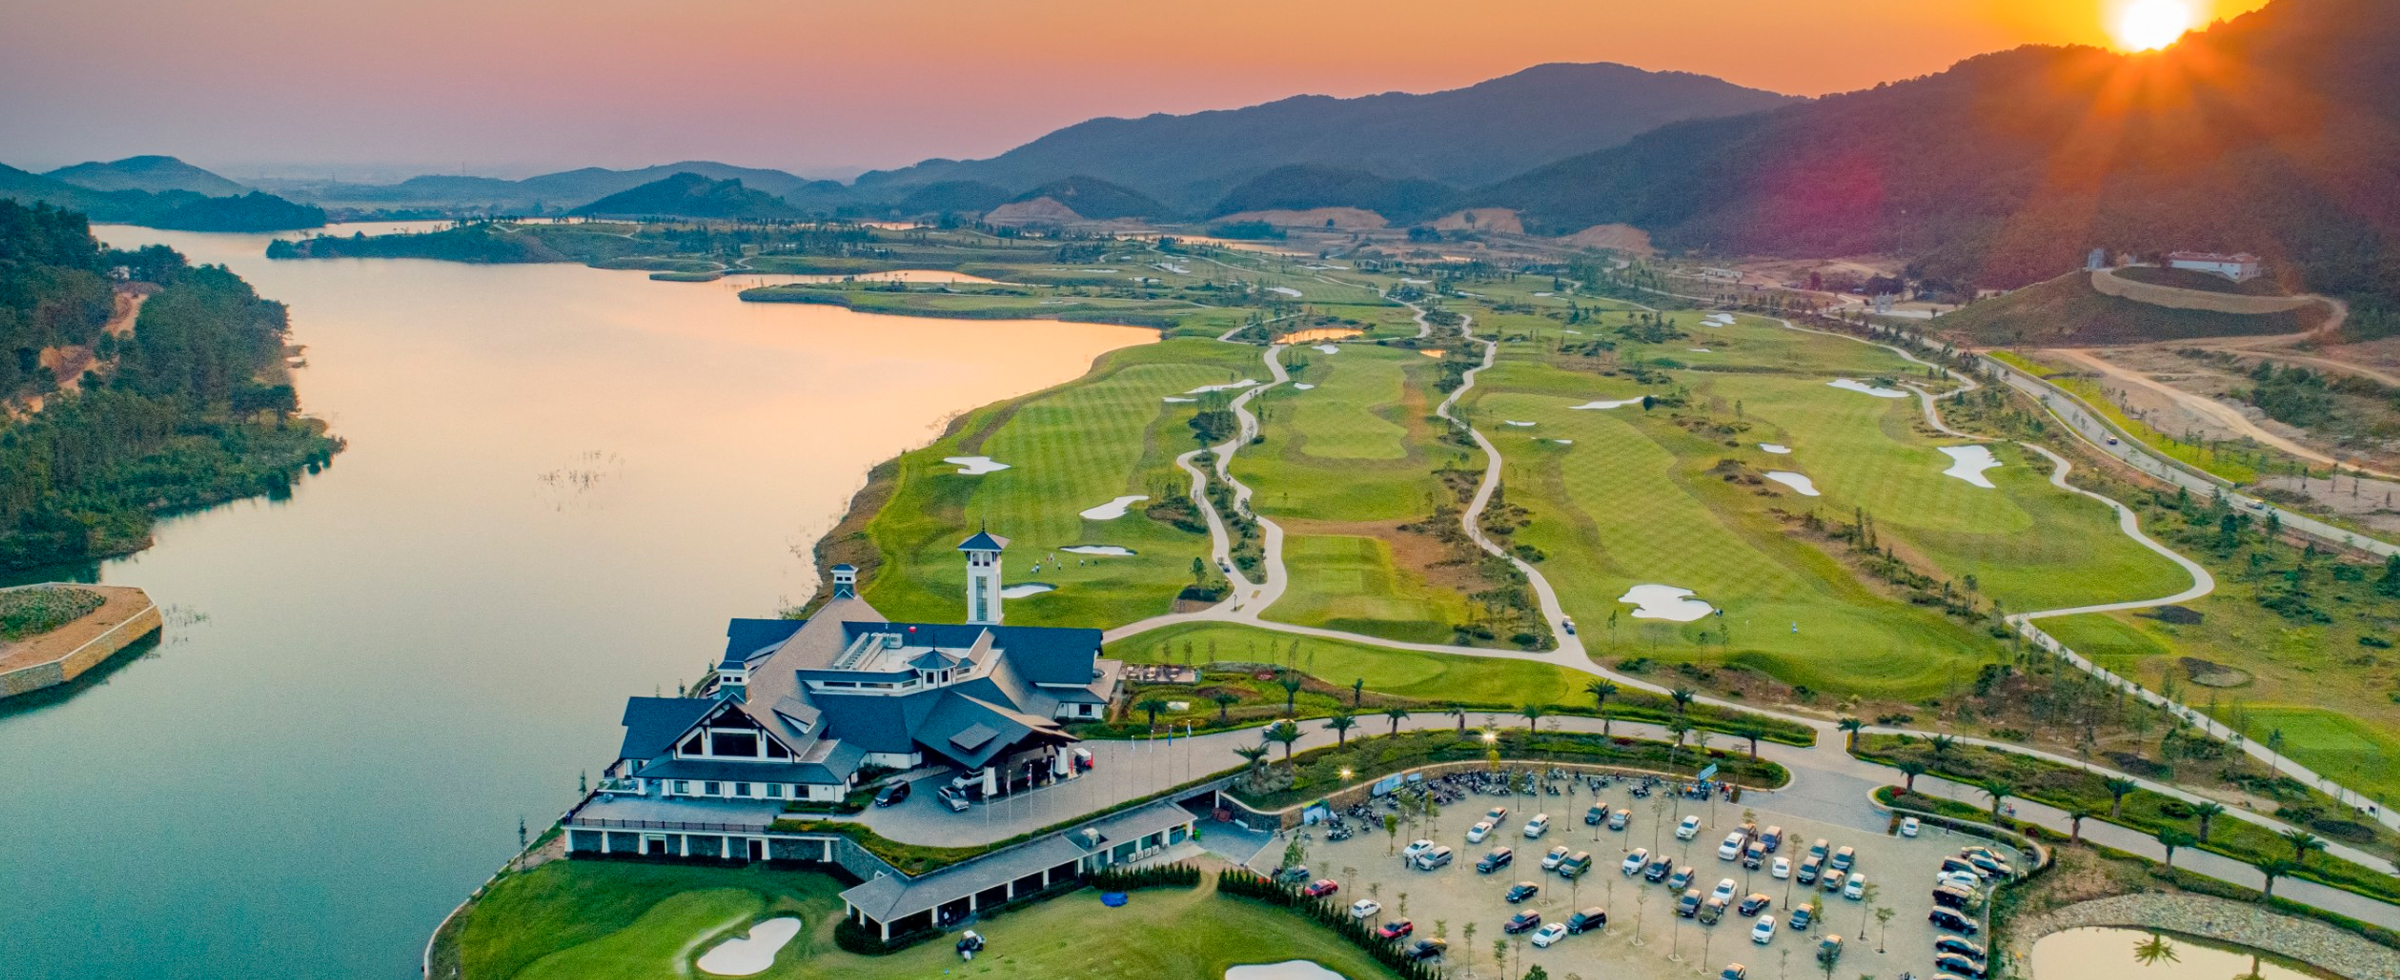 thanh lanh golf courses